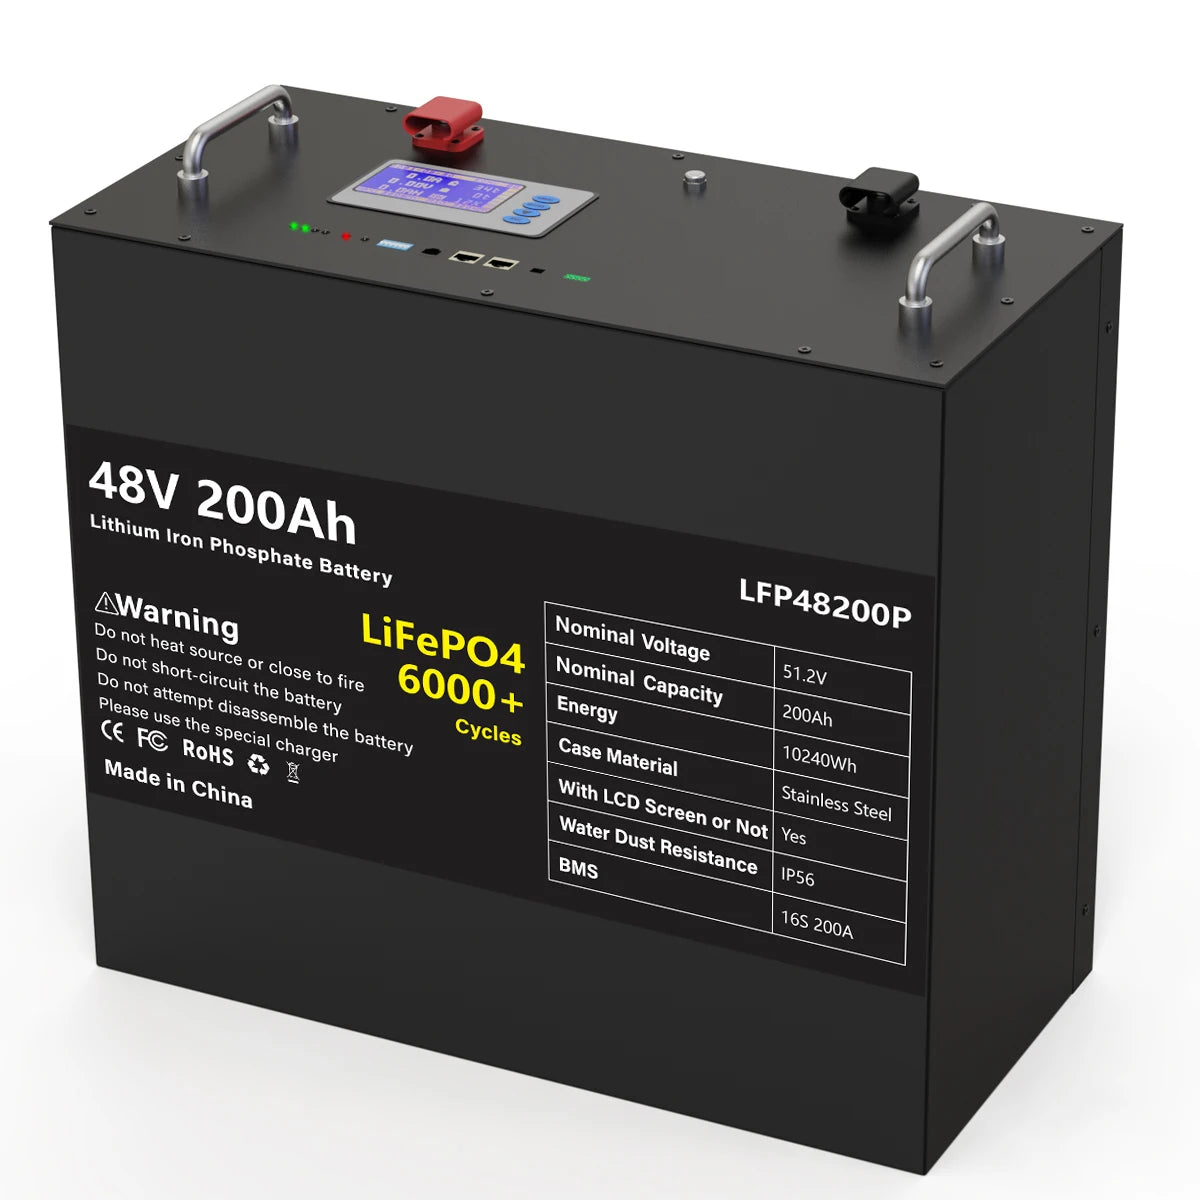 48V 100AH 200AH LiFePO4 Battery, Important Safety Note: Do not discharge, overcharge, or tamper with this 48V 200Ah LiFePO4 battery.